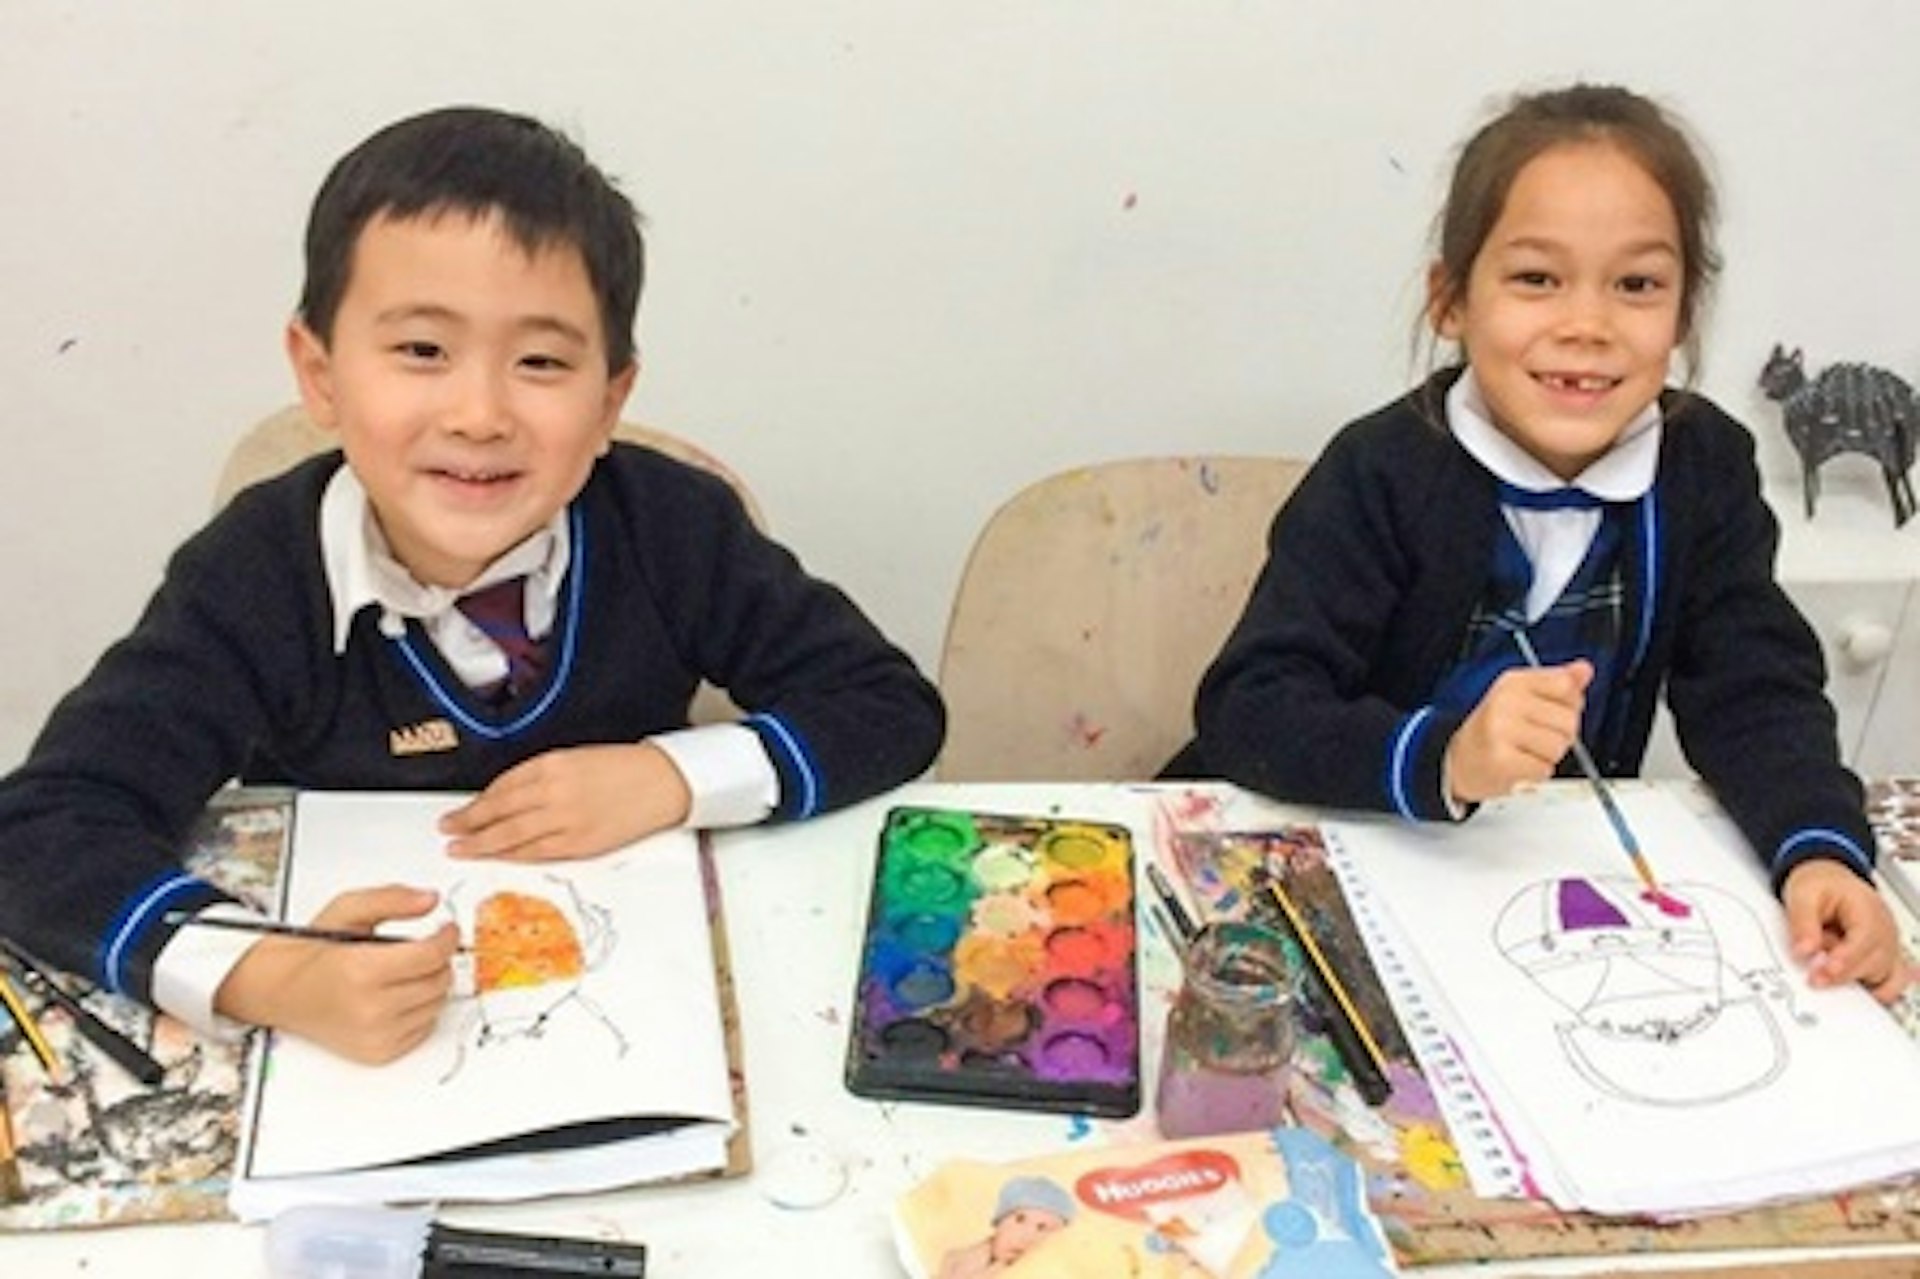 Children's Introductory Art Class with Art-K 3